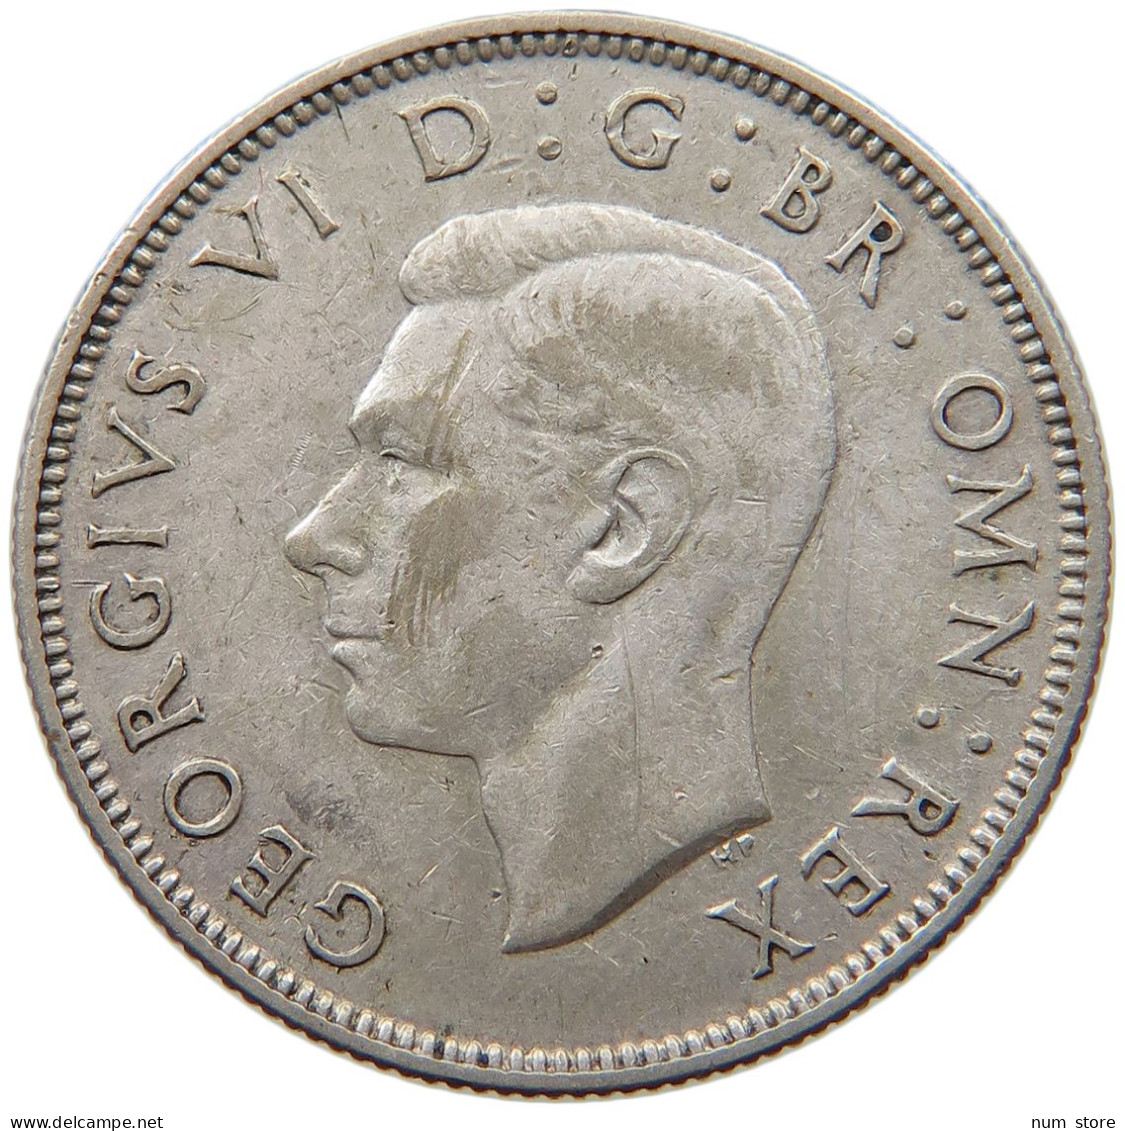 GREAT BRITAIN TWO SHILLINGS 1944 George VI. (1936-1952) #s035 0145 - J. 1 Florin / 2 Schillings